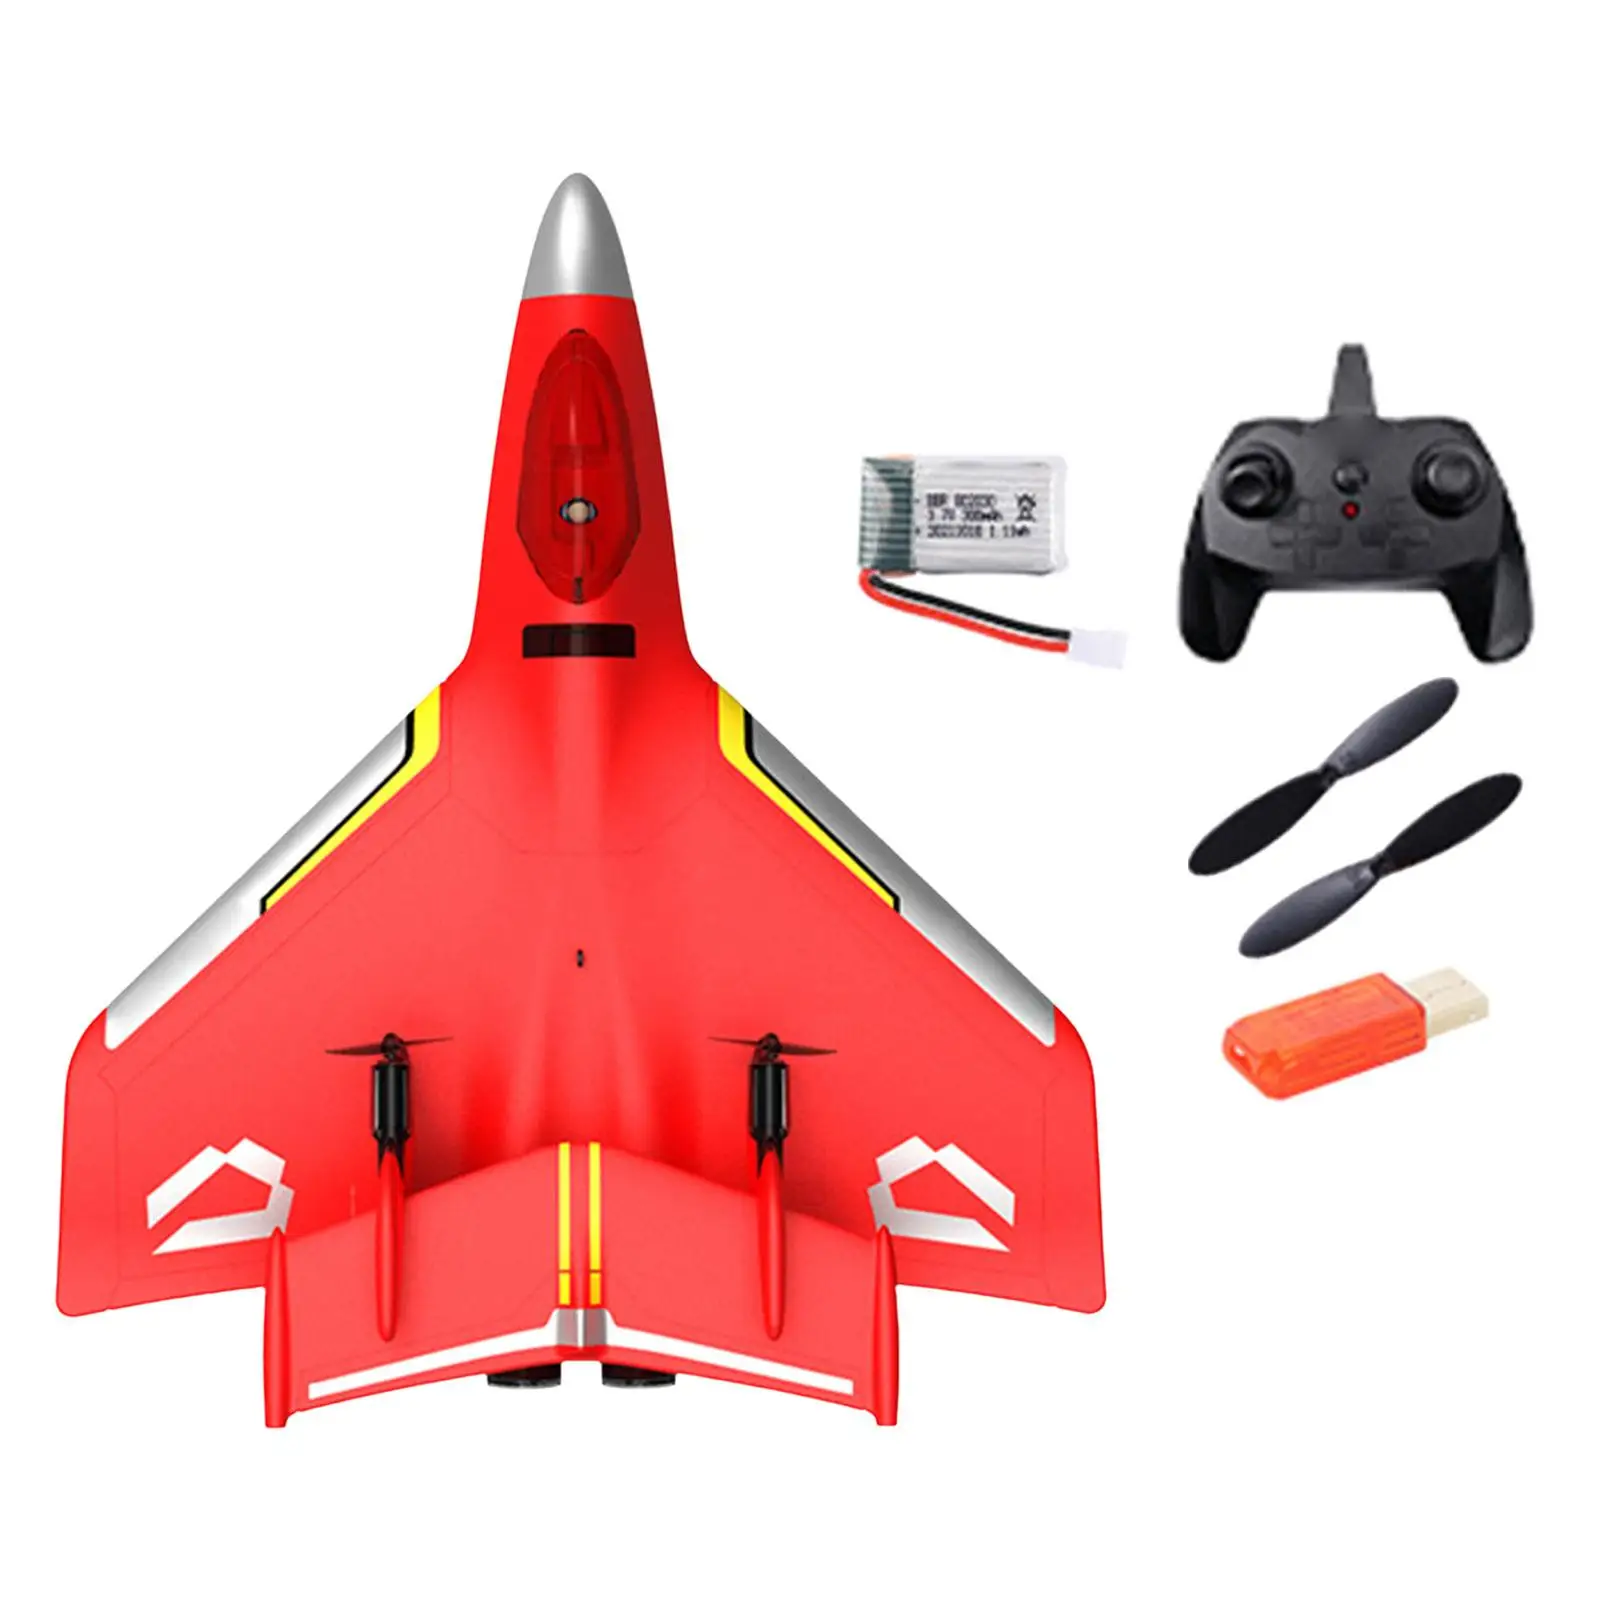 RC Plane Portable Outdoor Flighting Toys Easy to Control 2.4GHz Stable RC Aircraft Jet Hobby RC Glider for Beginner Boys Girls